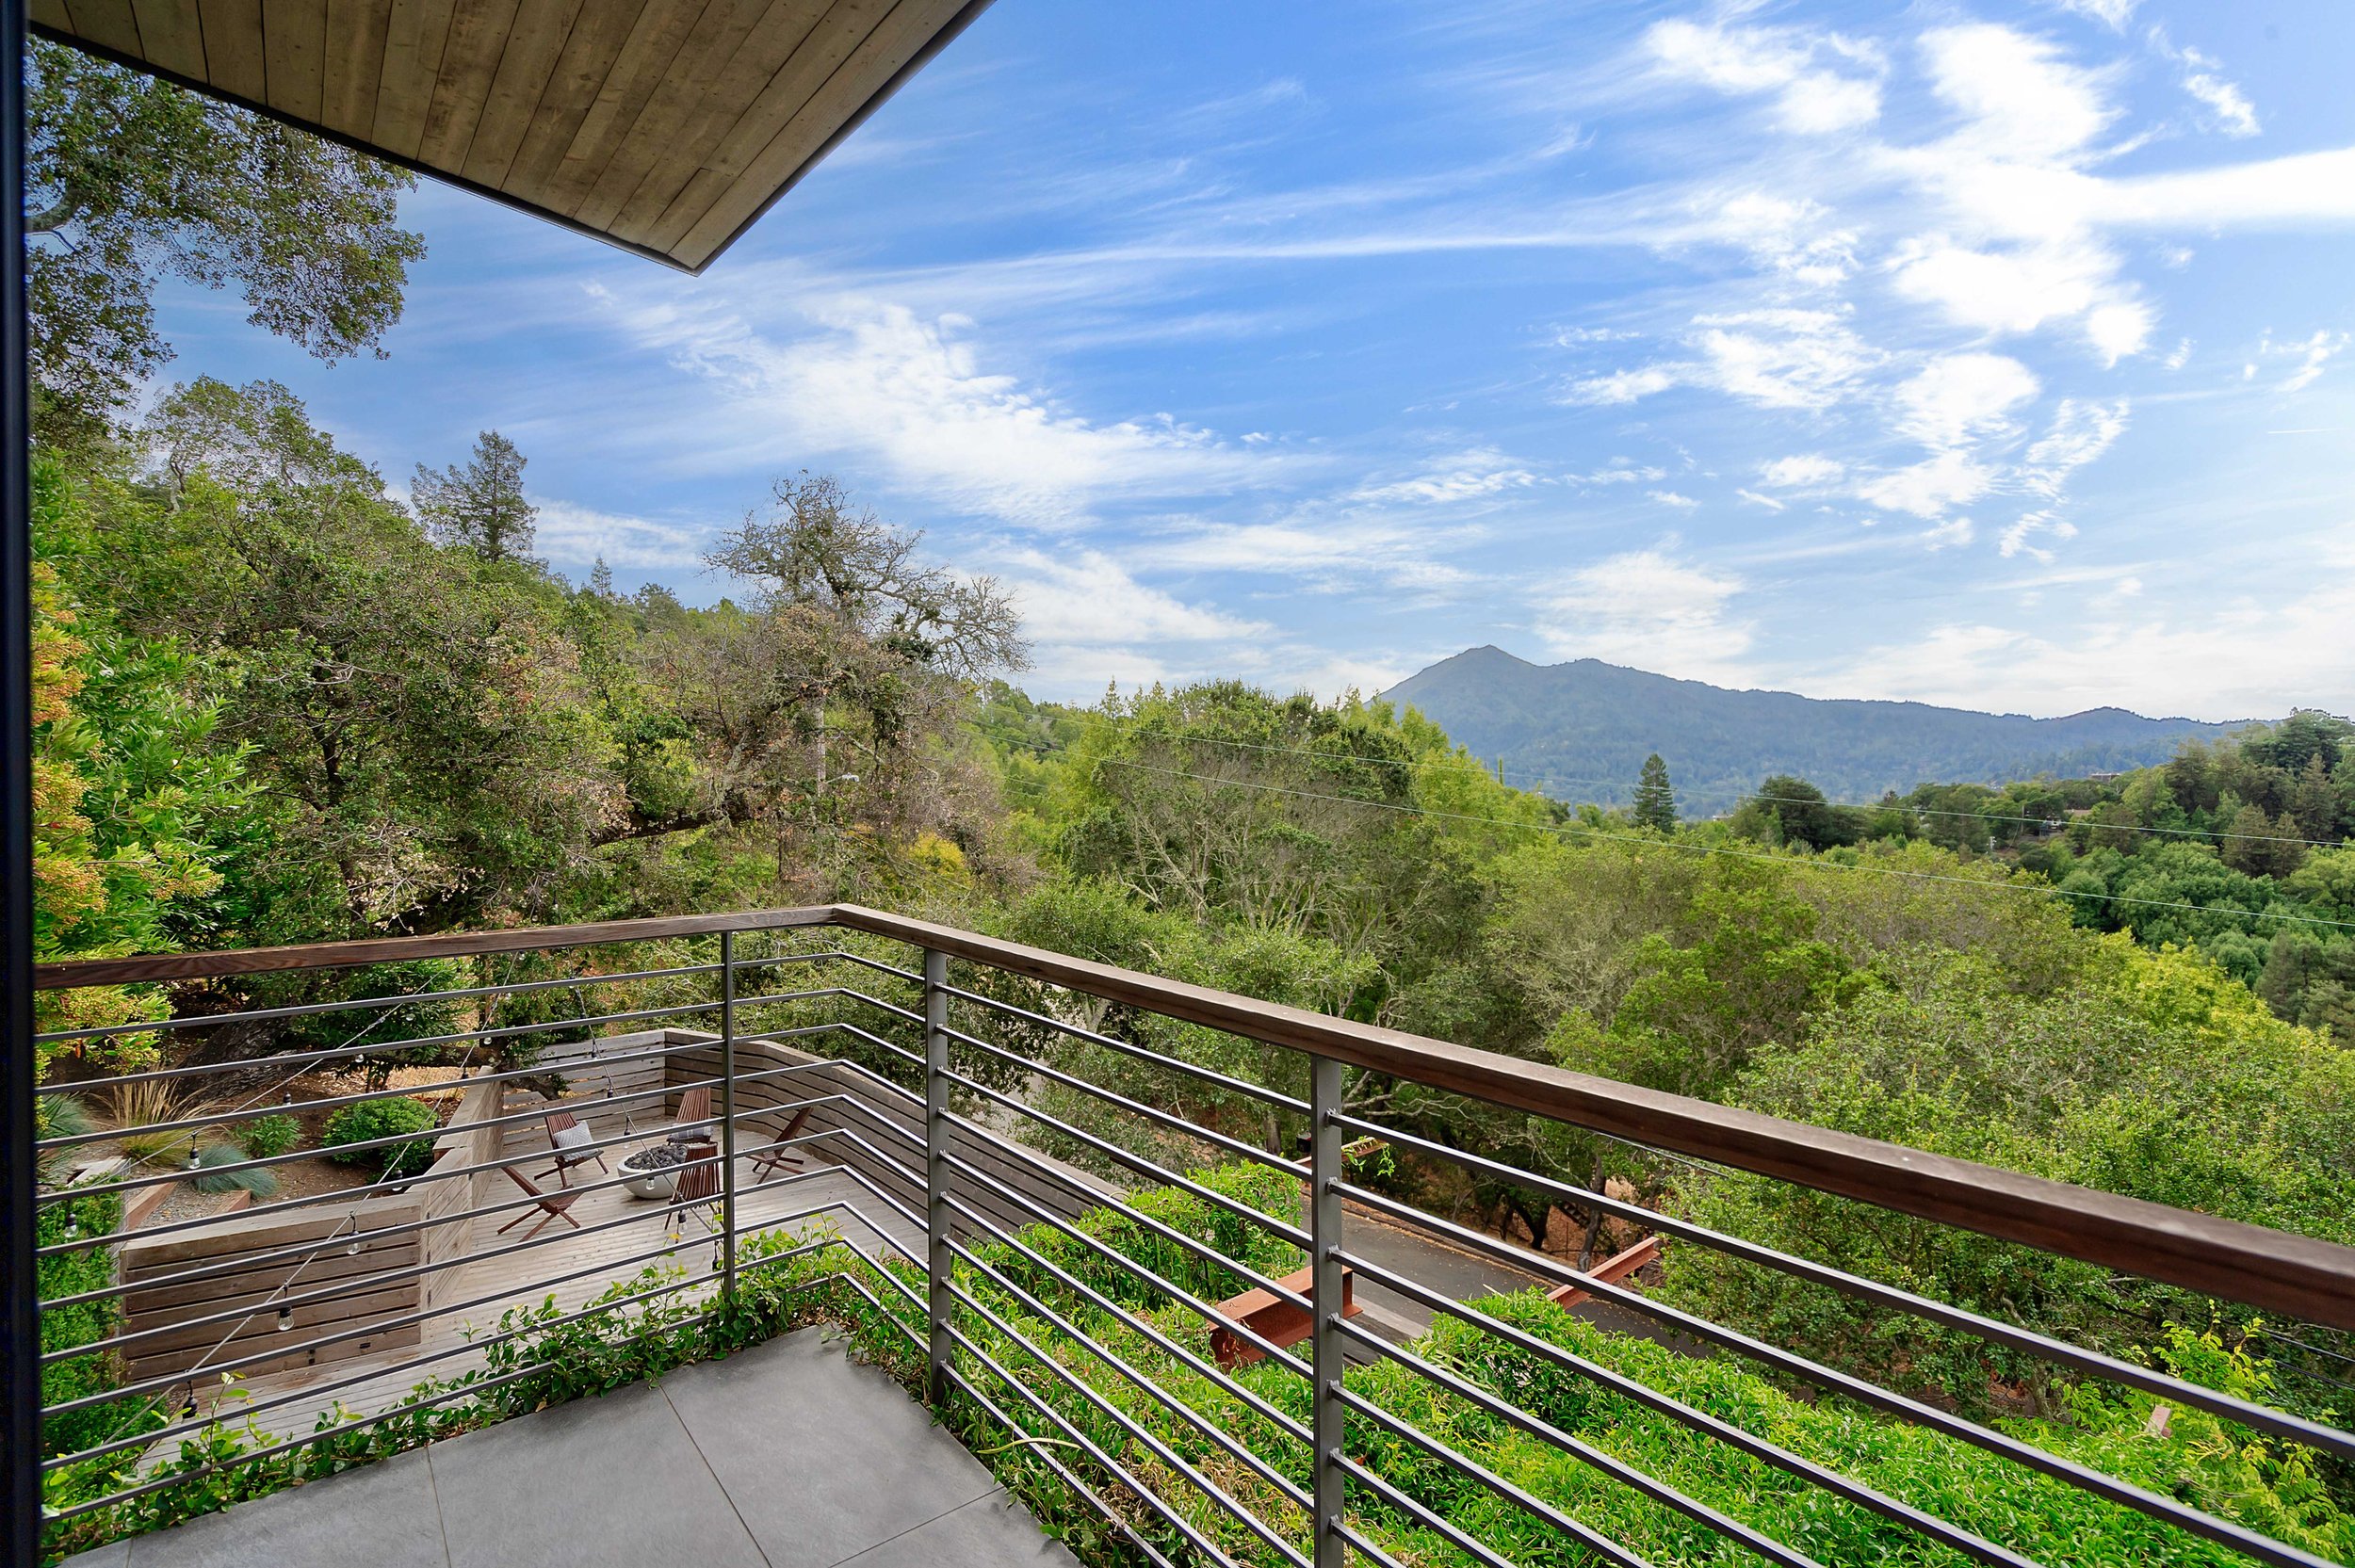 7 Meyer Road San Rafael Real Estate For Sale by Marin County Top Realtor Allie Fornesi at Own Marin Real Estate-72.jpg